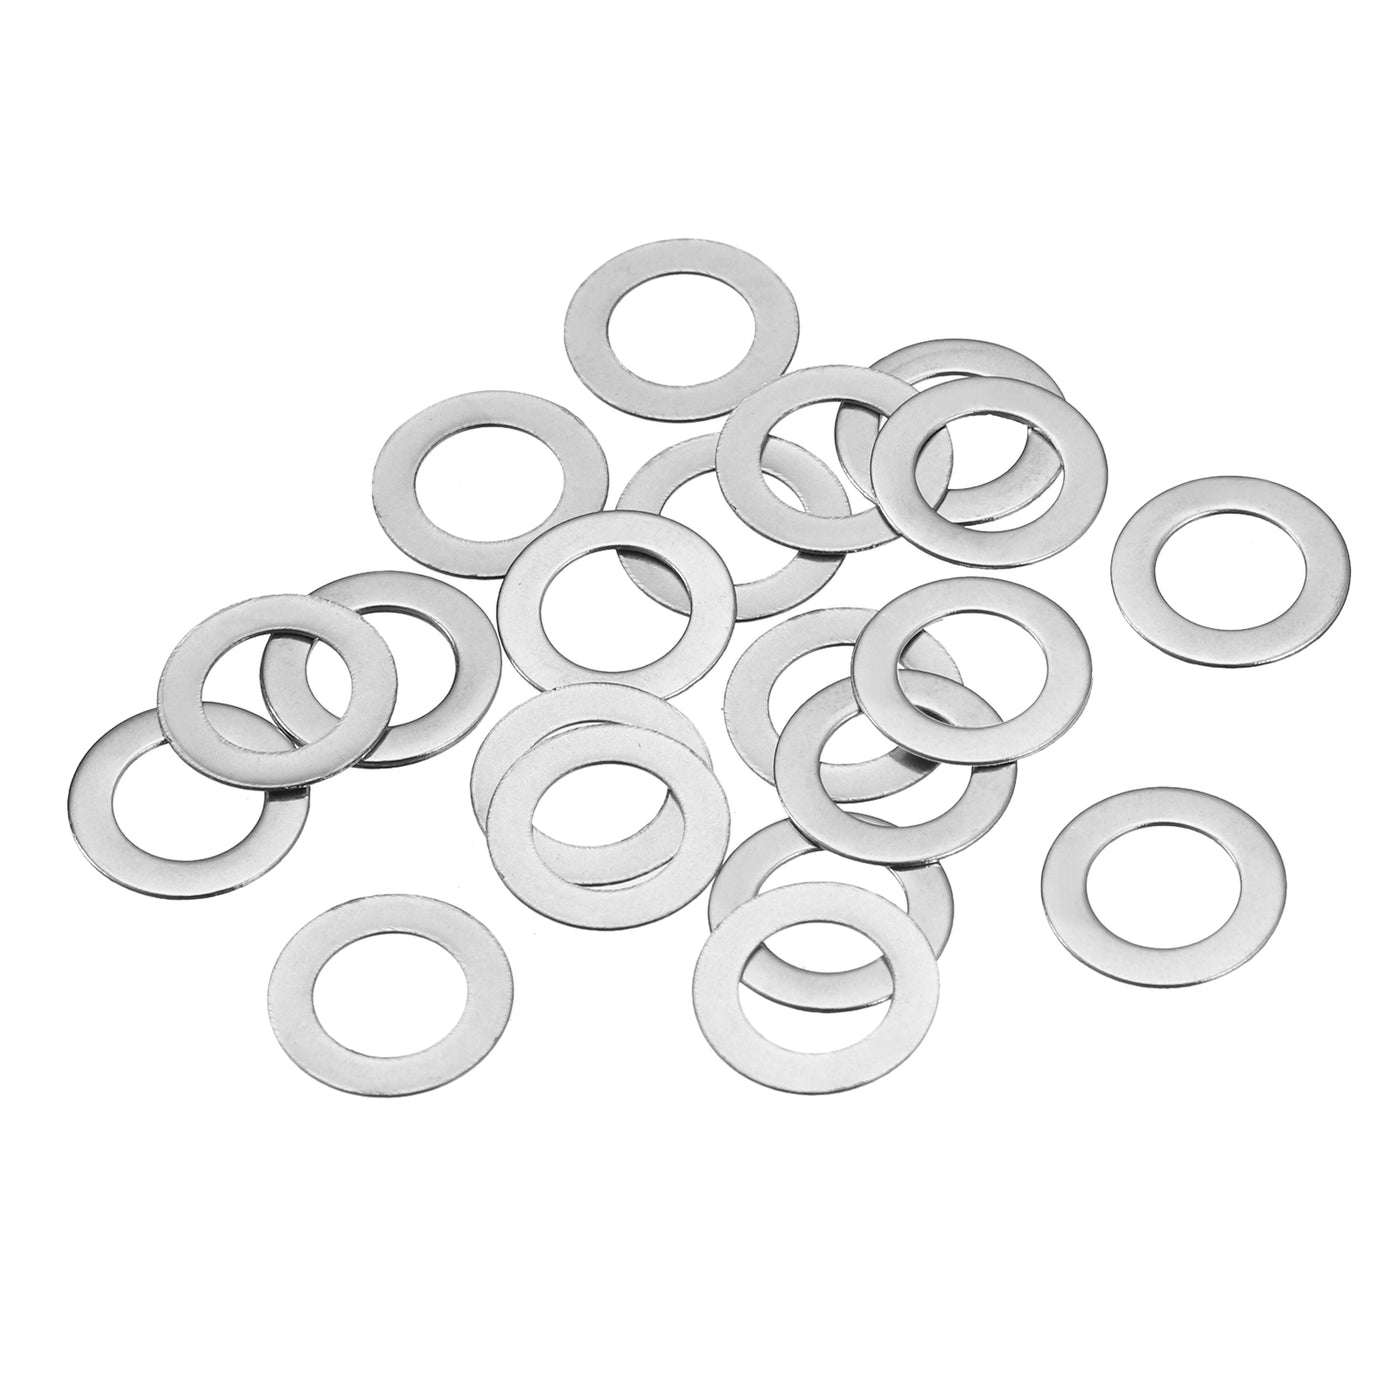 uxcell Uxcell M6 304 Stainless Steel Flat Washers, 20pcs 6x10x0.5mm Ultra Thin Flat Spacers